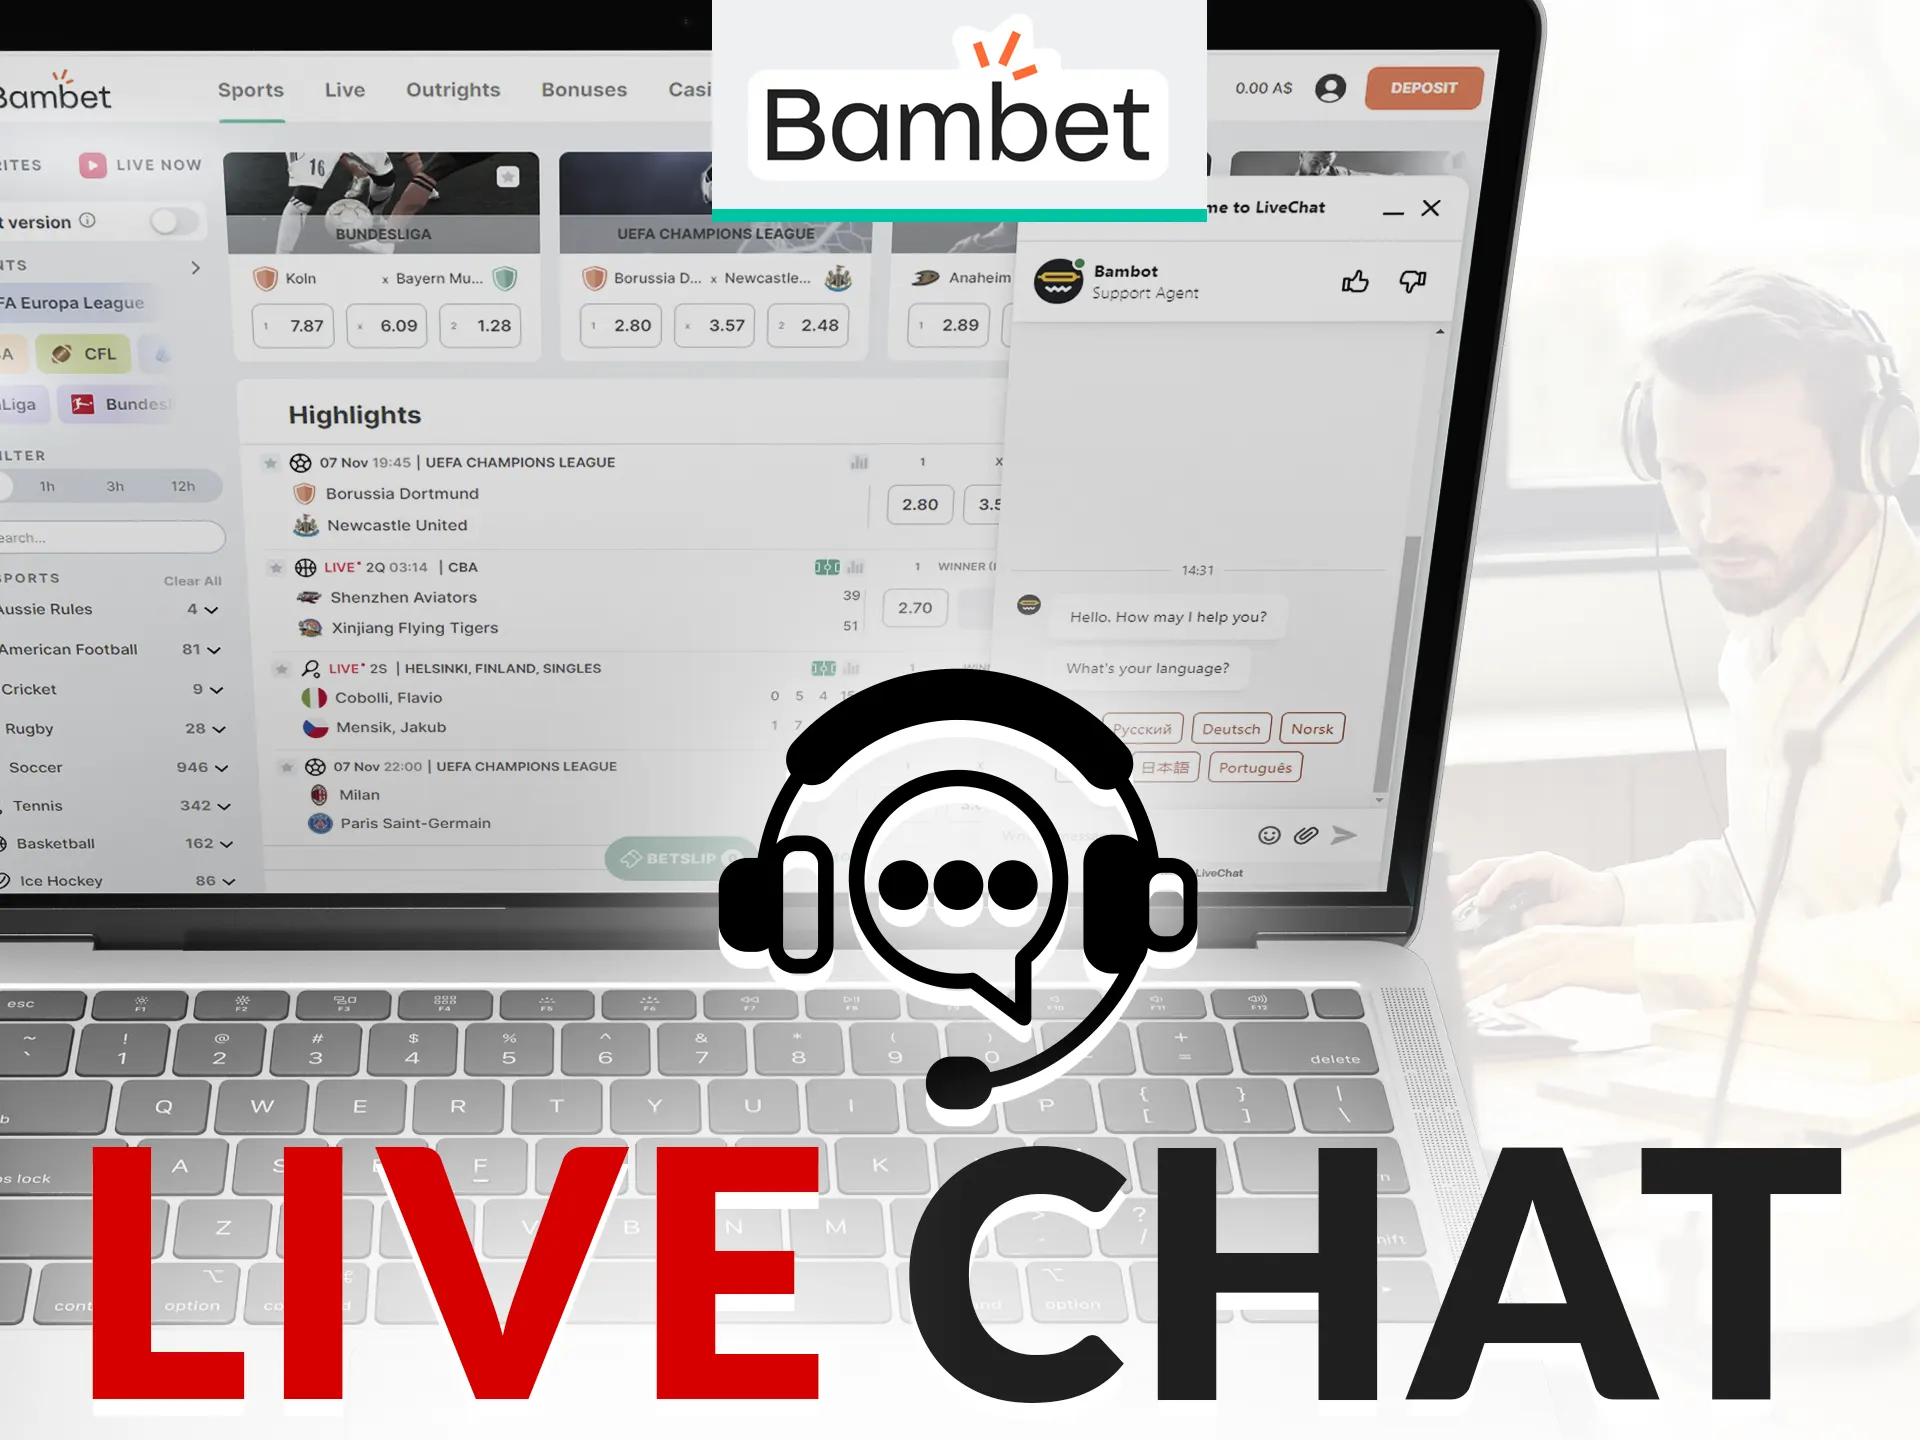 Bambet's support team is available to help via online chat.